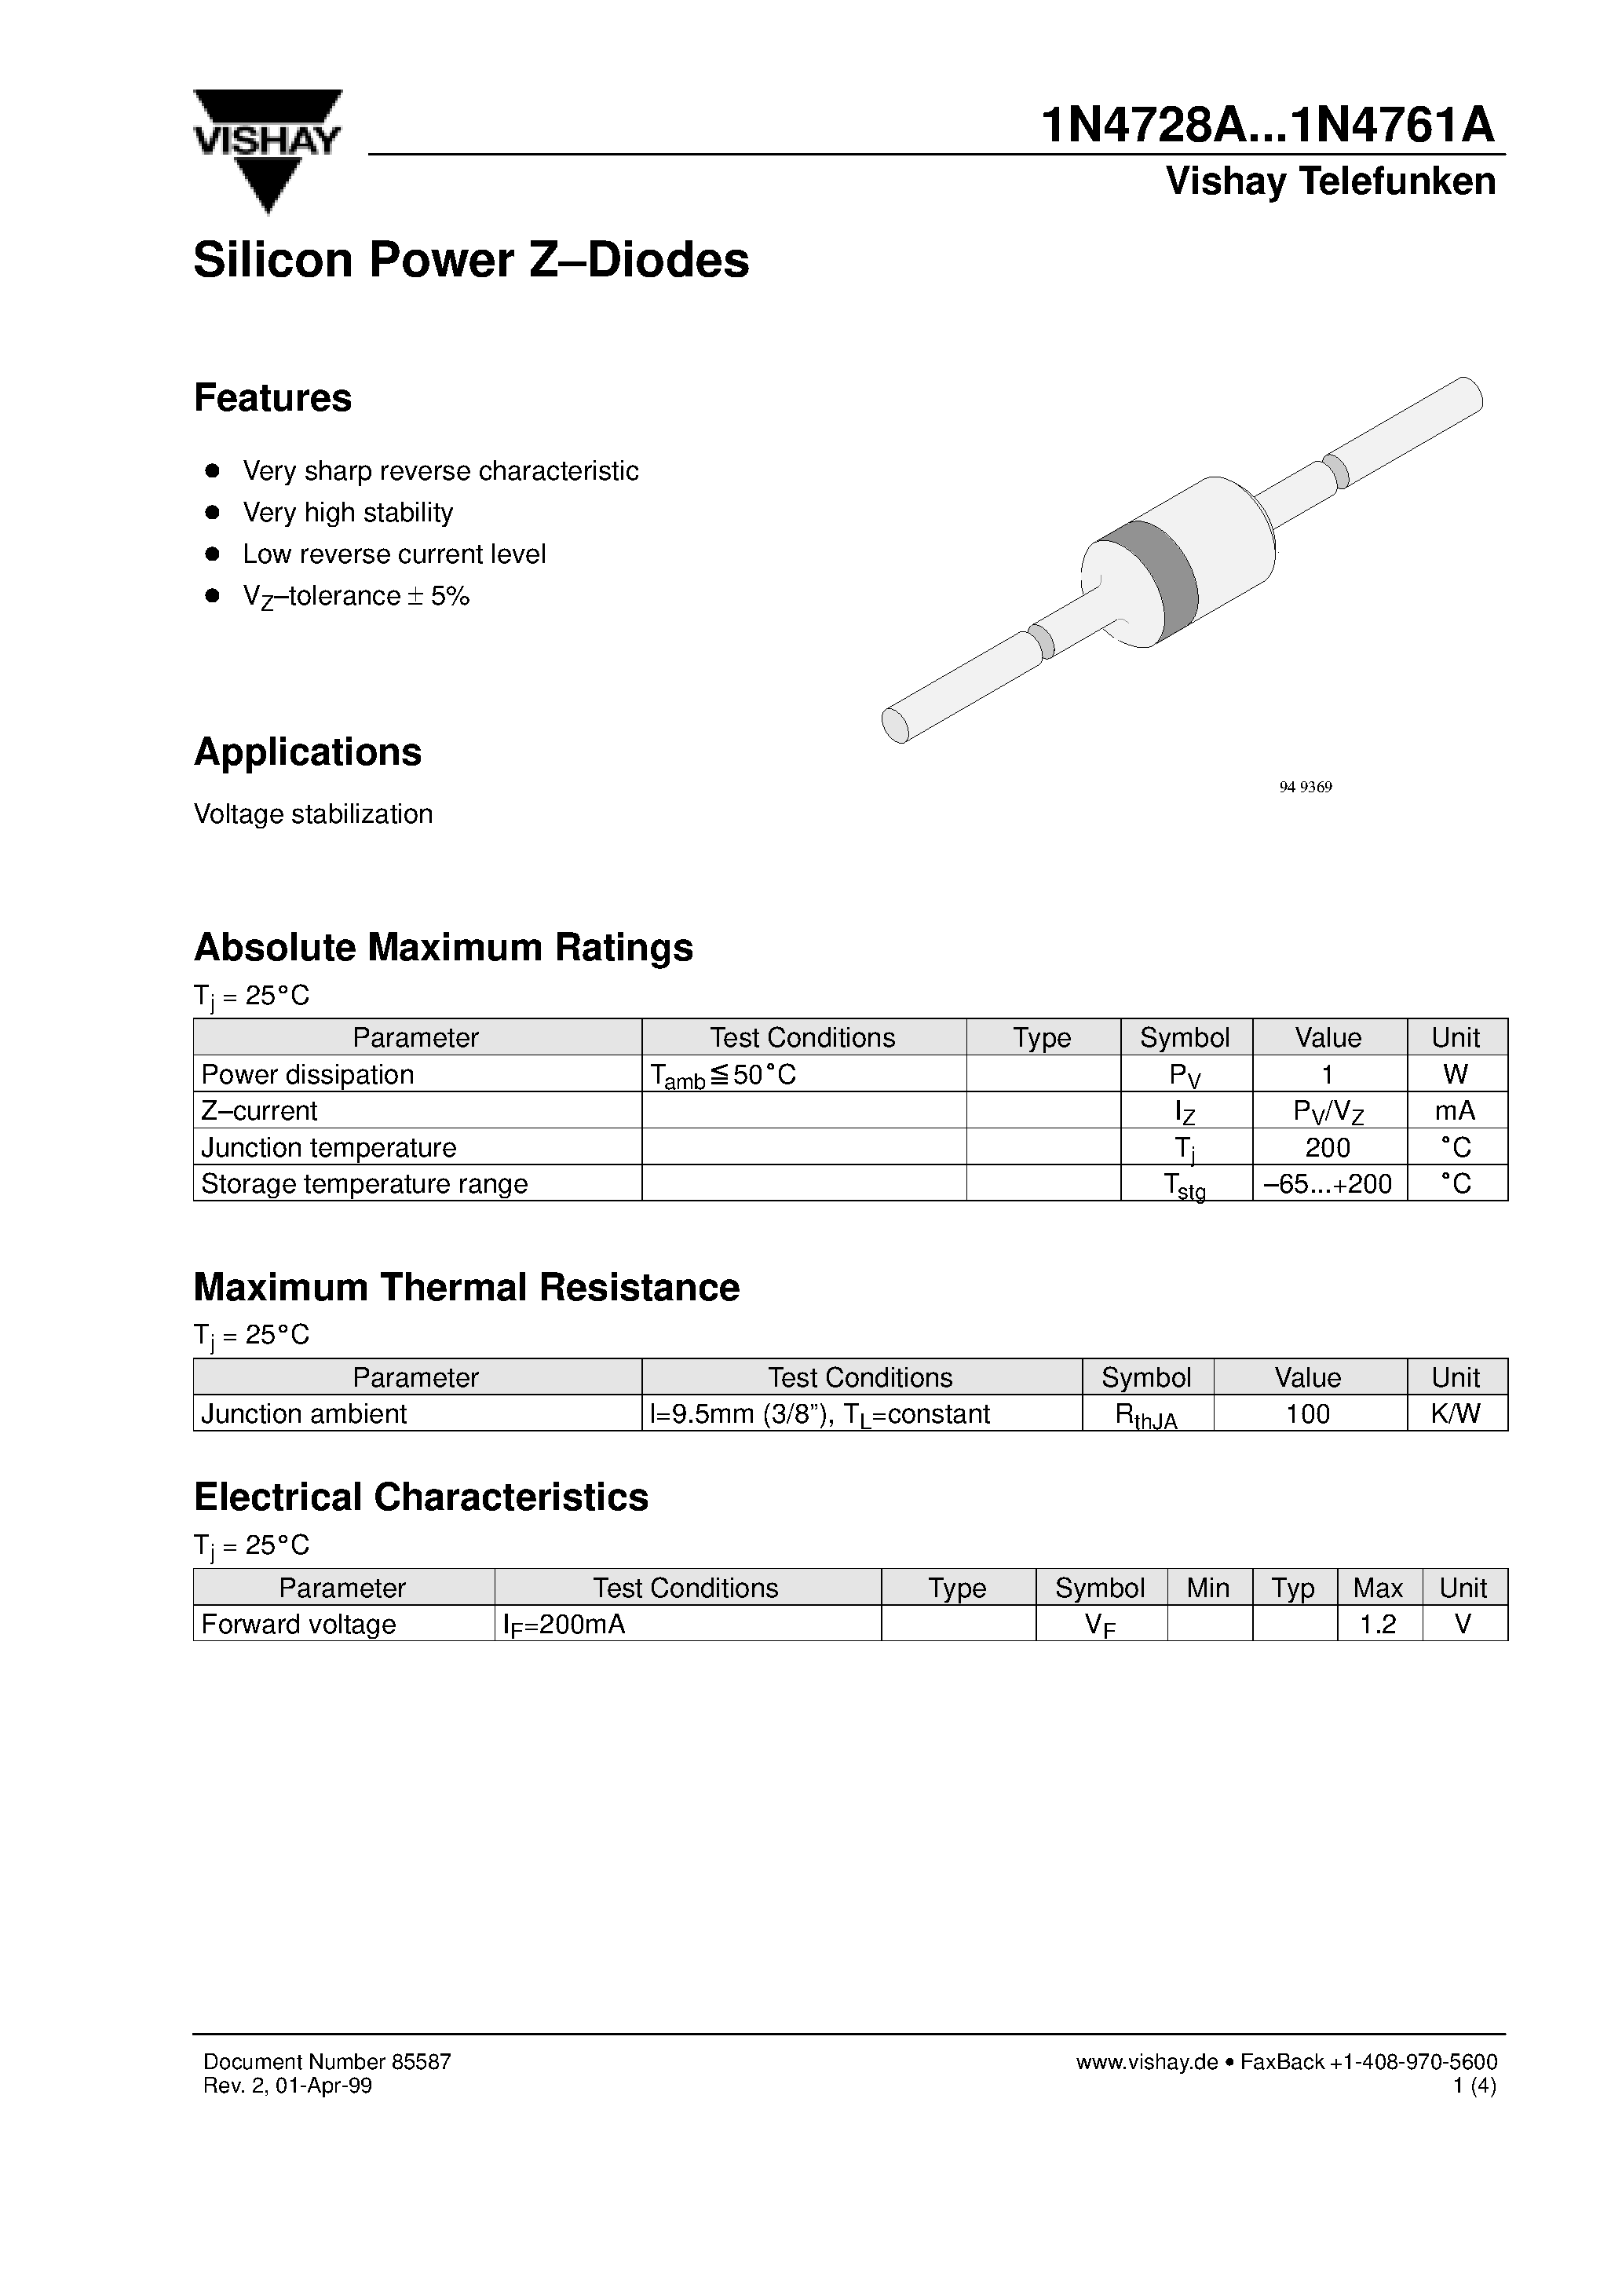 Даташит 1N4729A - Silicon Power Z-Diodes страница 1